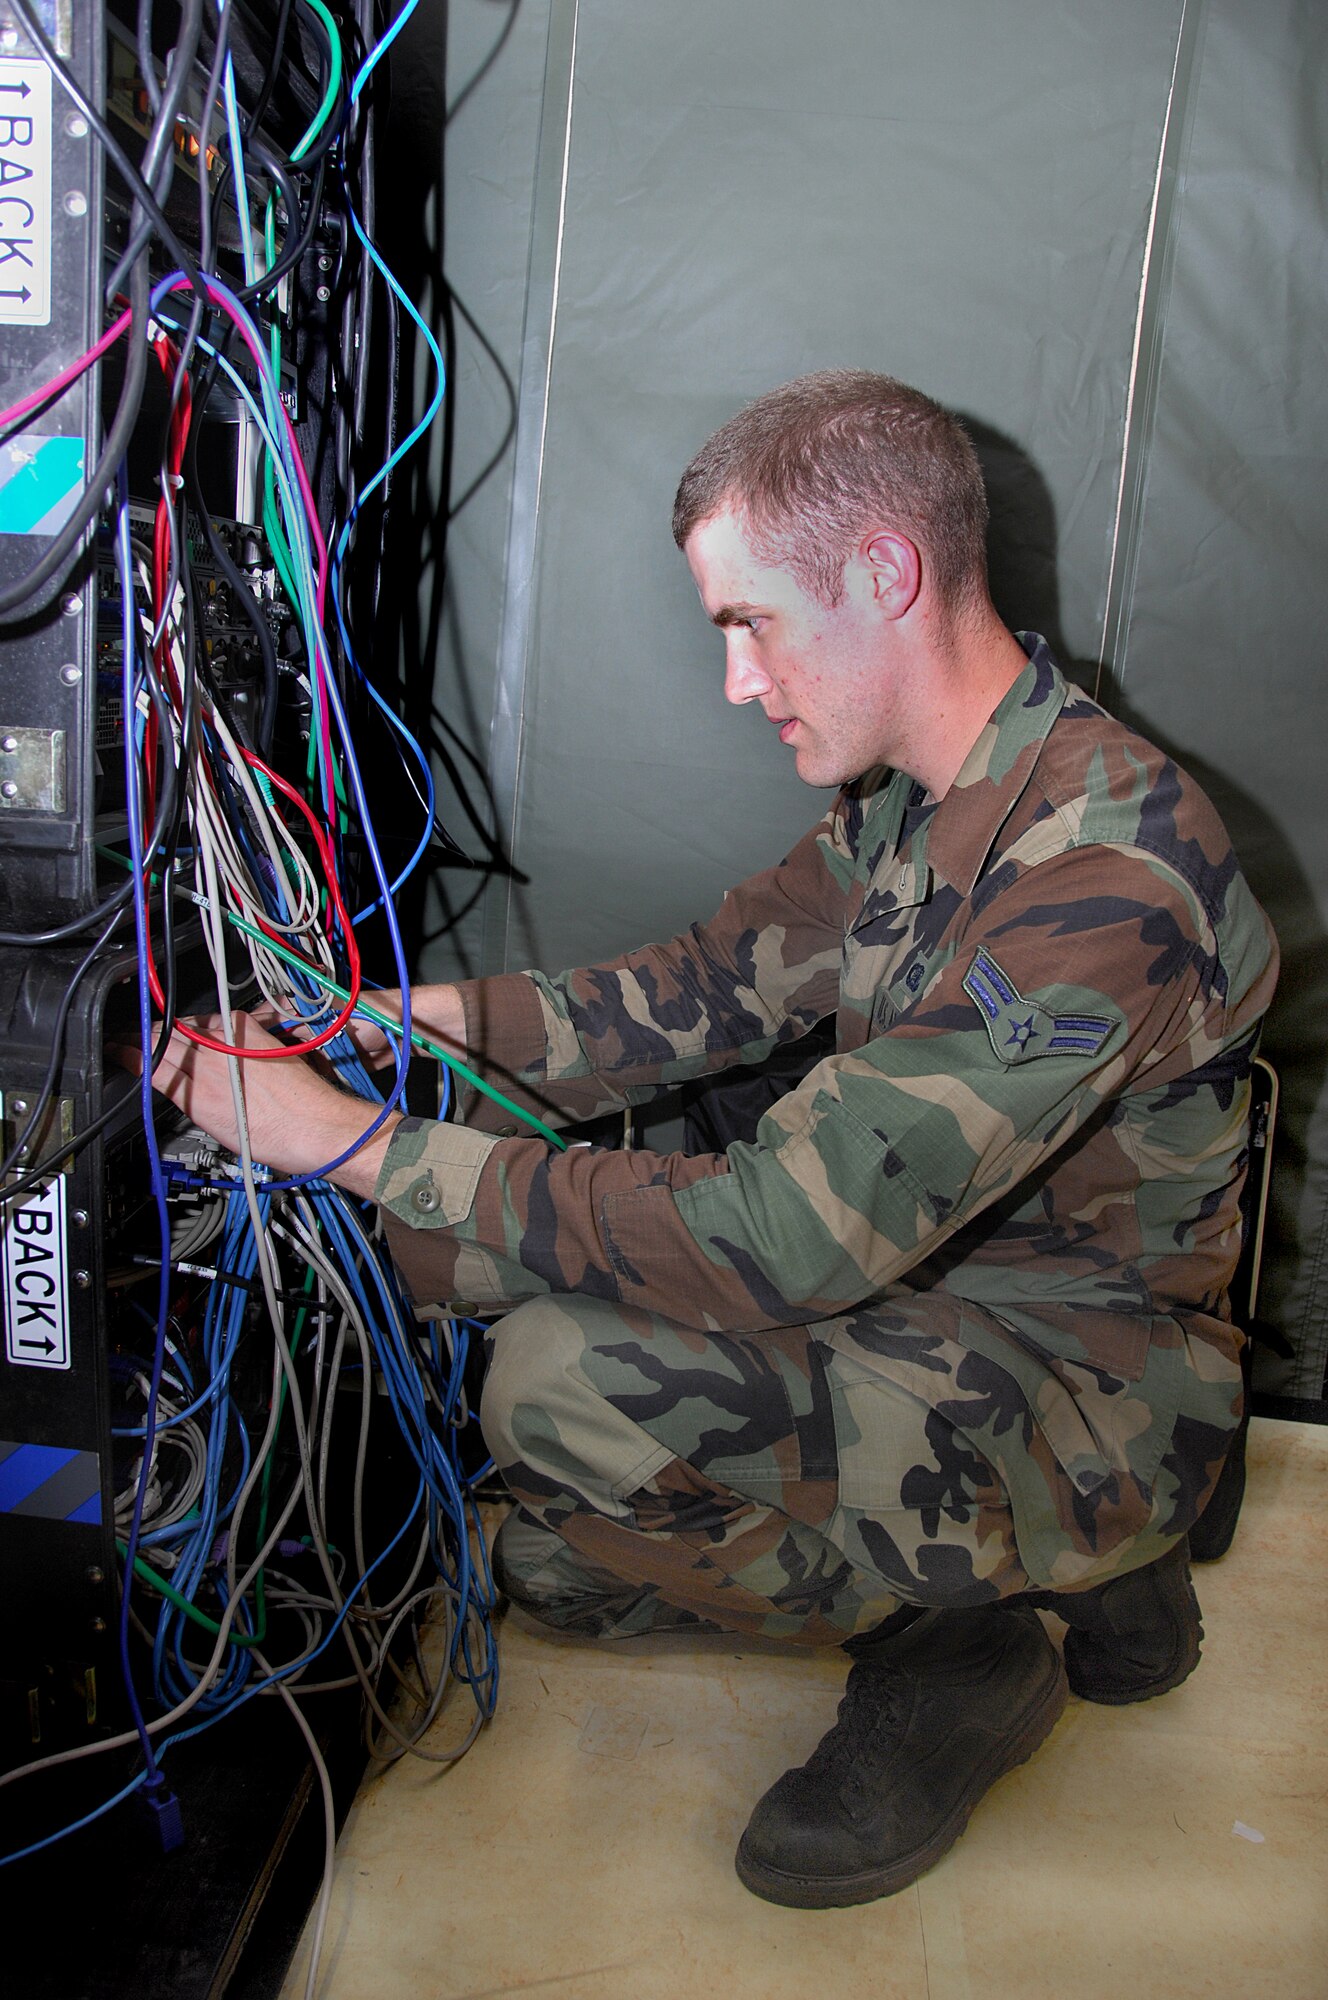 ANDERSEN AIR FORCE BASE, Guam - Airman 1st Class Joseph Lapthorne, 644th Combat Communications Squadron network control center operator, ensures local area connection cables are secure during the squadron's Dragon Thunder field training exercise Nov. 20 here. The field training exercise sharpened the 644th CBCS Airmen's expeditionary skills.